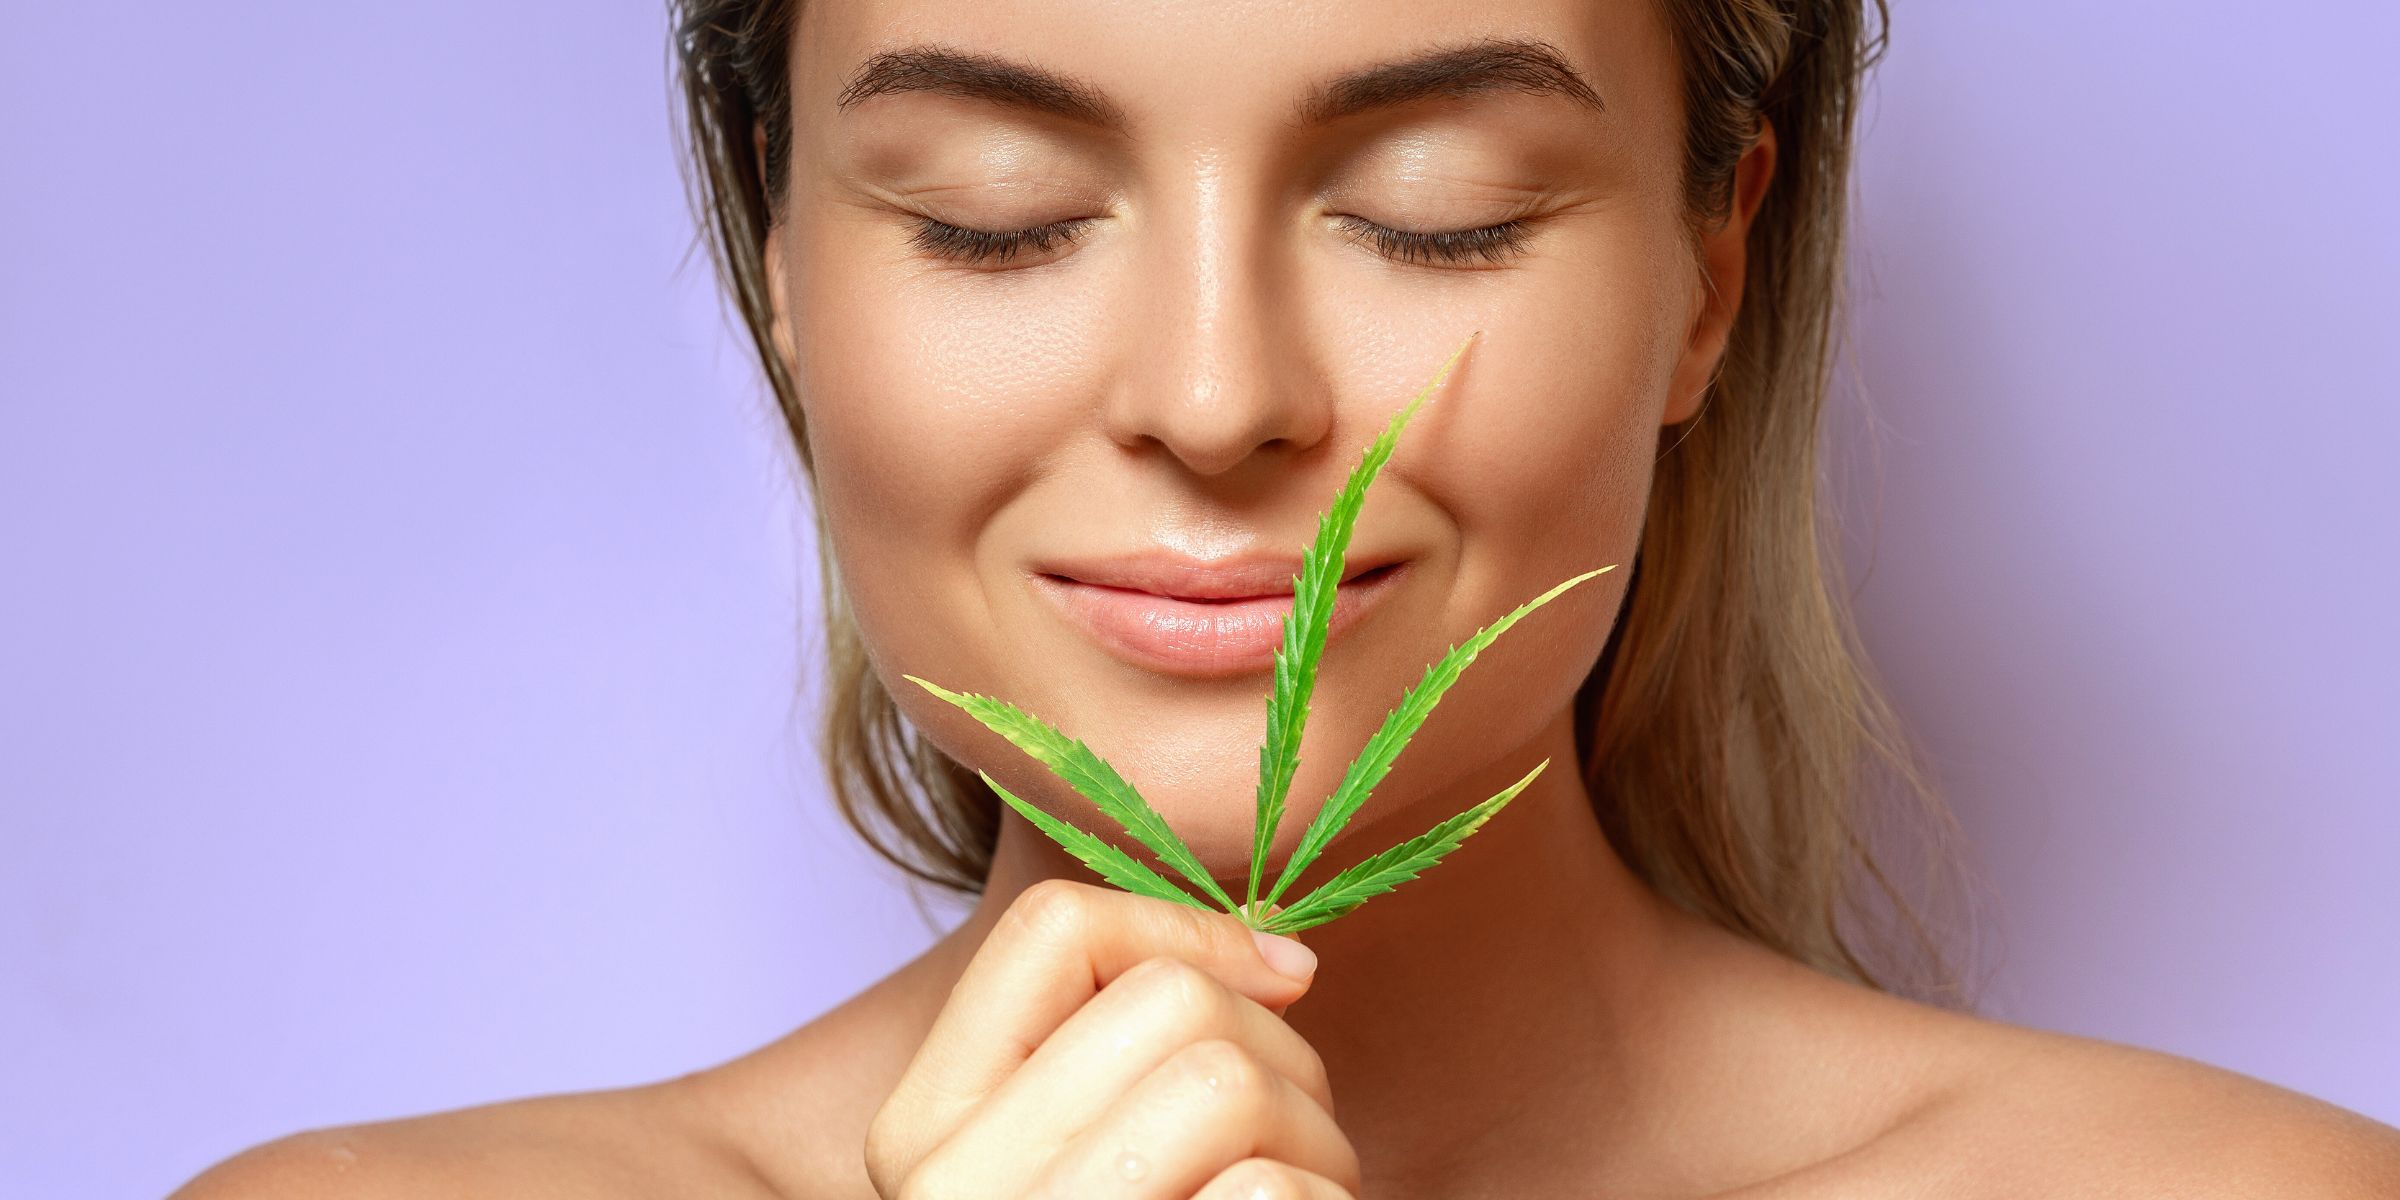 woman standing with hemp leaf smiling against purple background relaxed